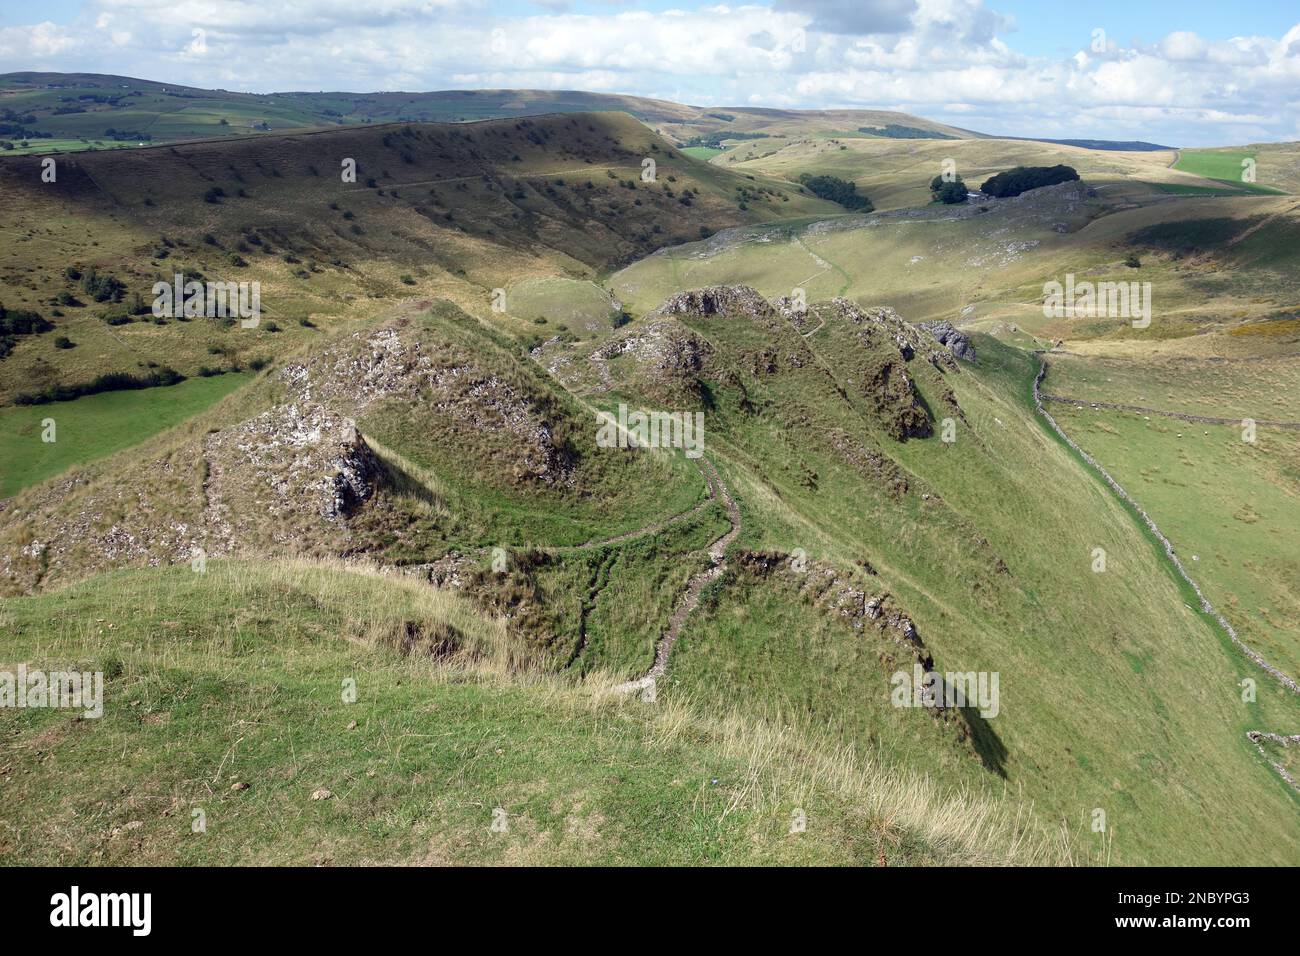 The Path over the Lumps & Bumps on the Dragons Back Ridge from the Summit of Chrome Hill in the Dove Valley, Peak District National Park, England, UK. Stock Photo